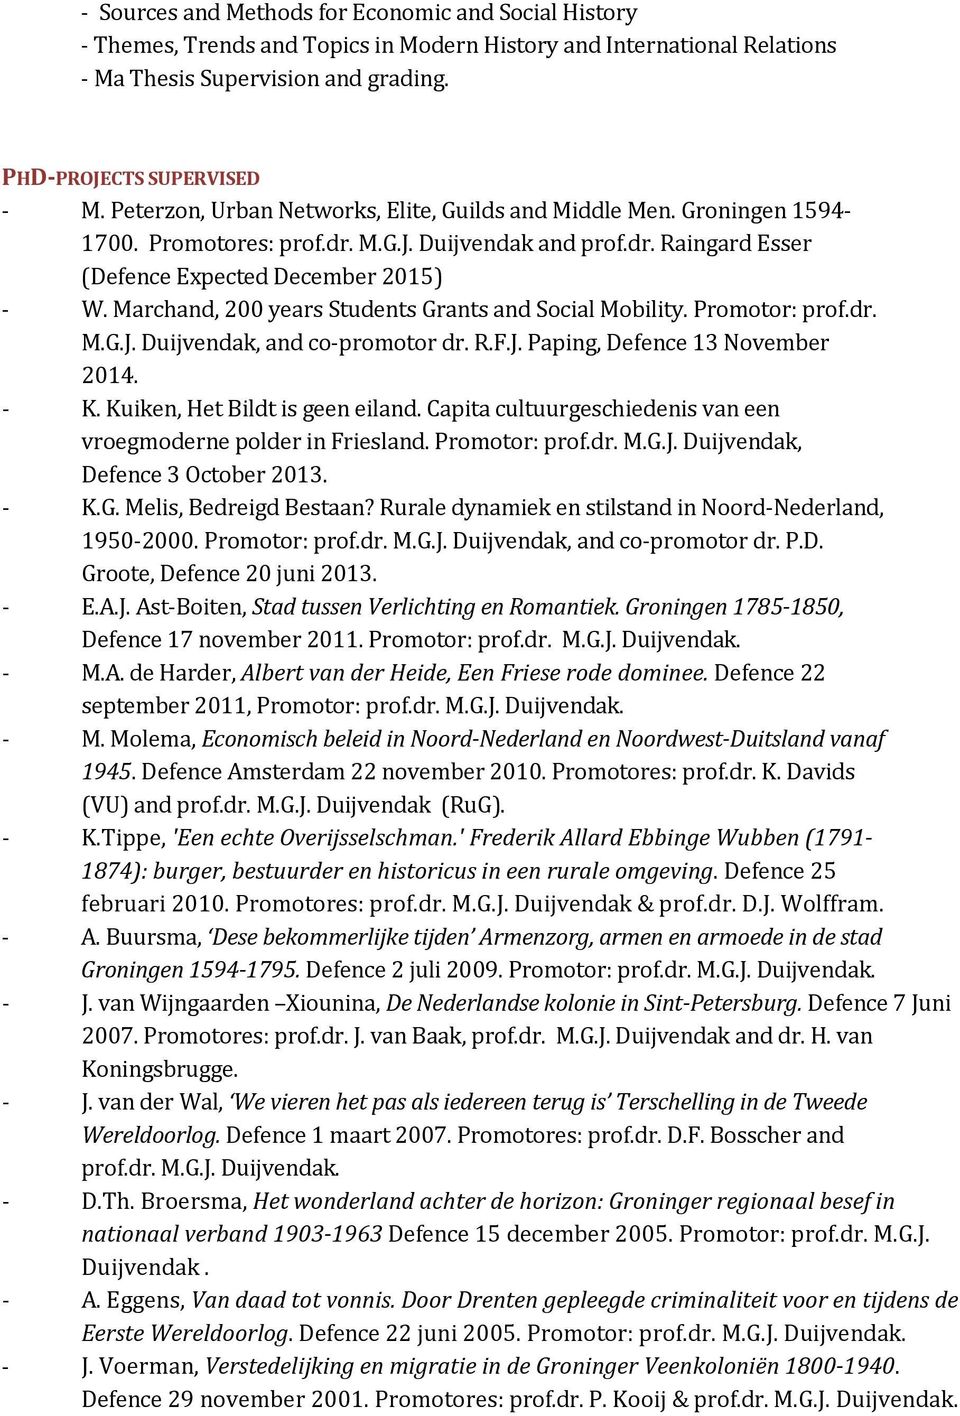 Marchand, 200 years Students Grants and Social Mobility. Promotor: prof.dr. M.G.J. Duijvendak, and co-promotor dr. R.F.J. Paping, Defence 13 November 2014. - K. Kuiken, Het Bildt is geen eiland.